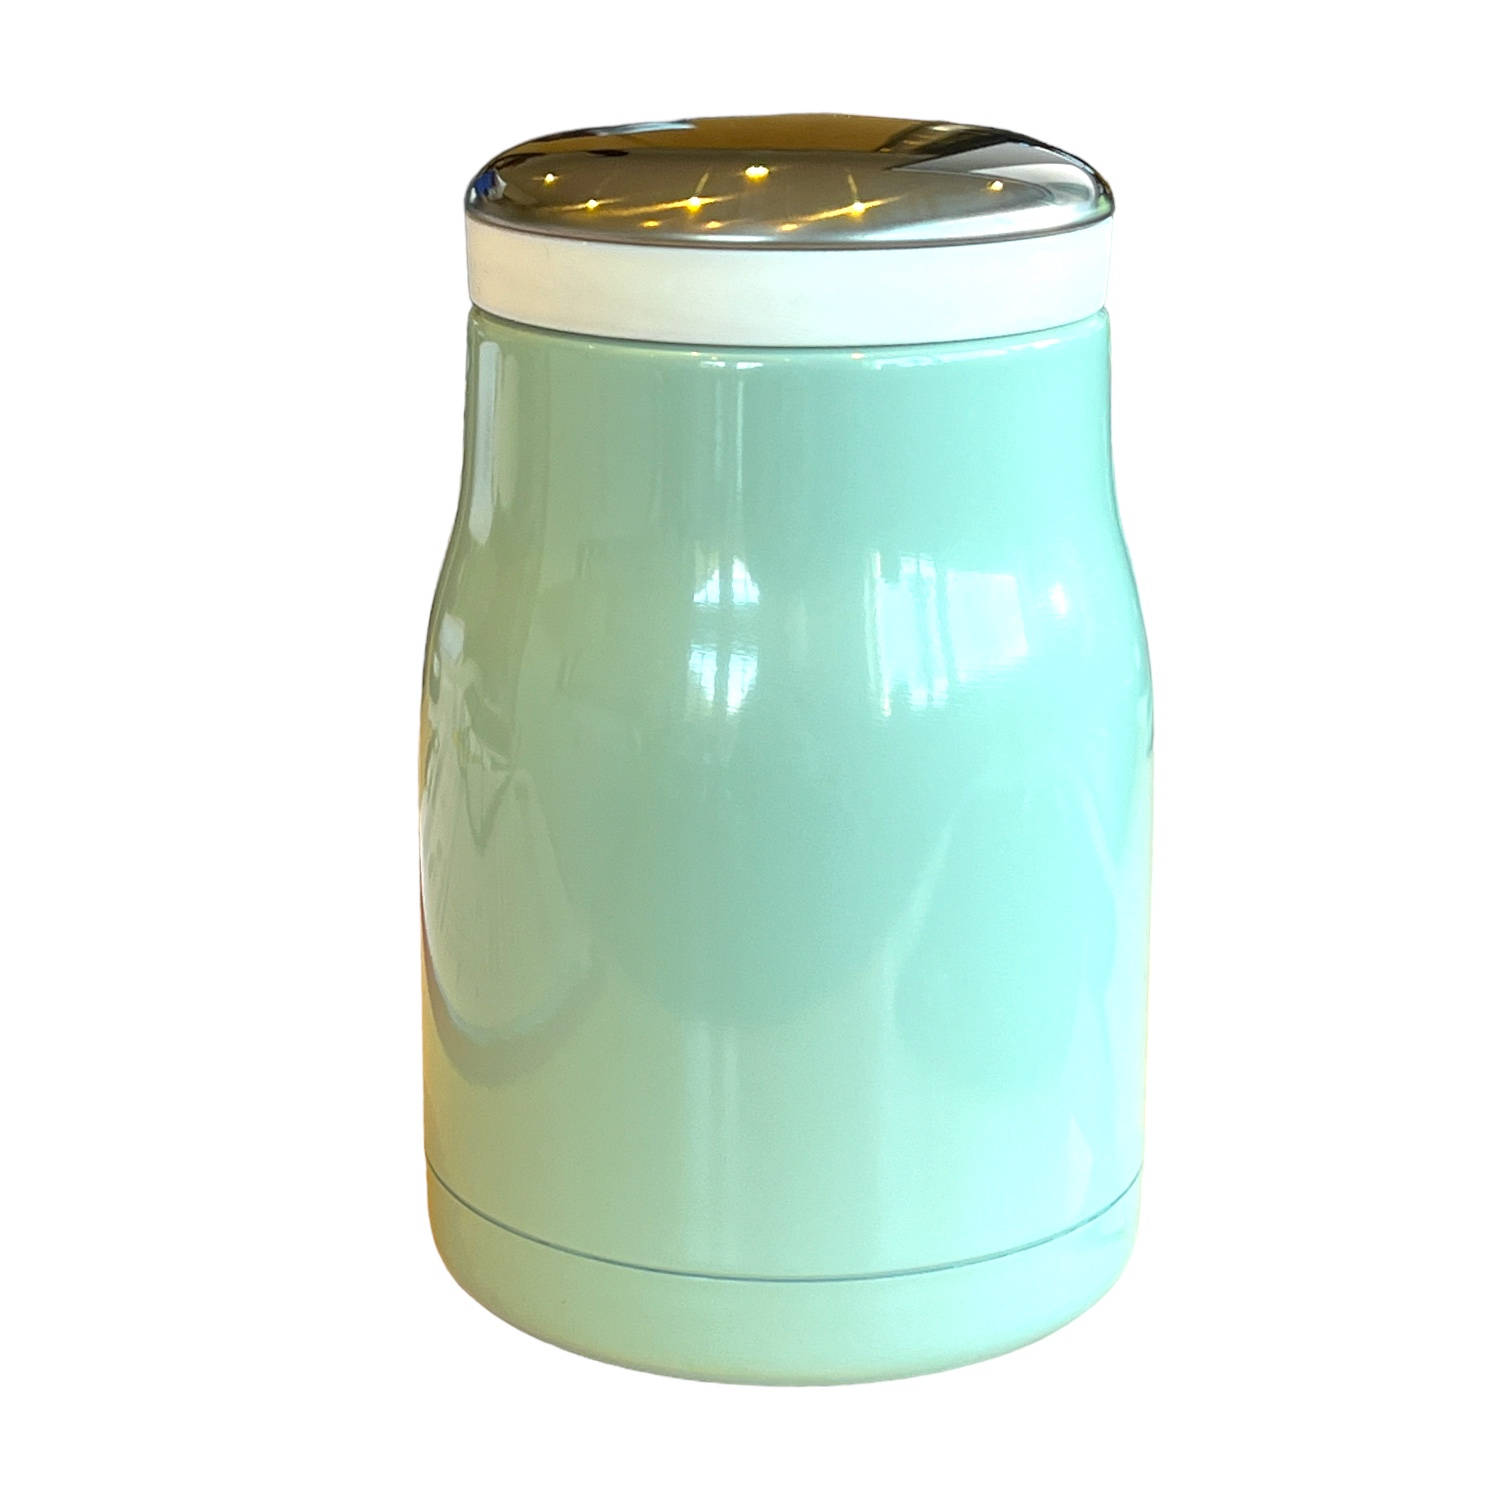 Thermos Voedsel Container 0.45 l, Groen, Roestvrij staal - 15 x 9.5 x 9.5 x cm